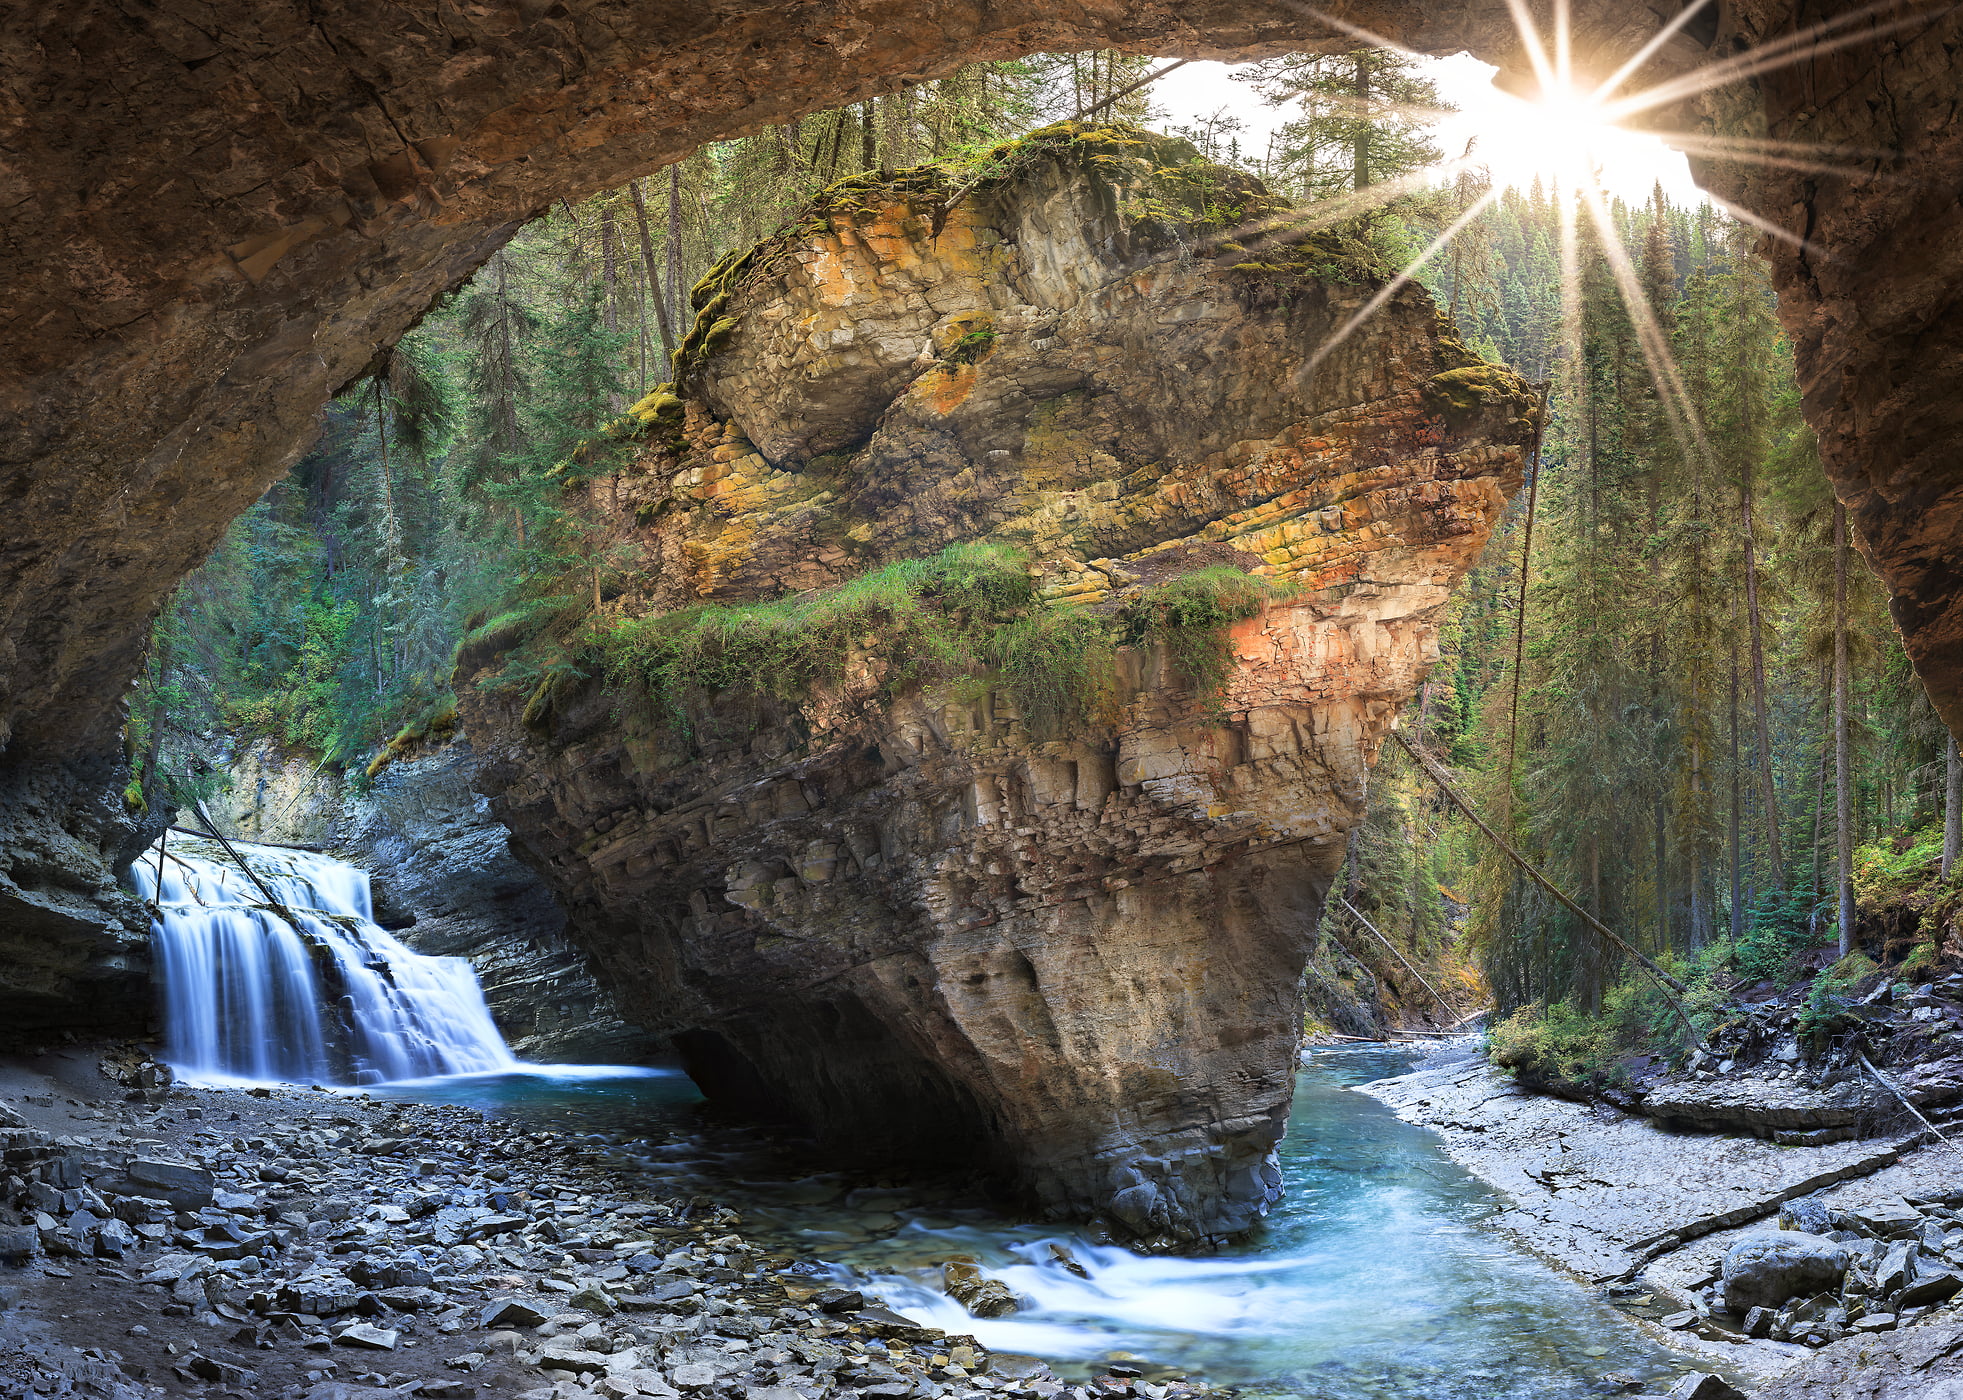 2,458 megapixels! A very high resolution, large-format nature photo of Johnston Canyon Cave, including a stream, waterfall, cave, and rock formation; fine art photograph created by Scott Dimond in Banff National Park, Alberta, Canada.